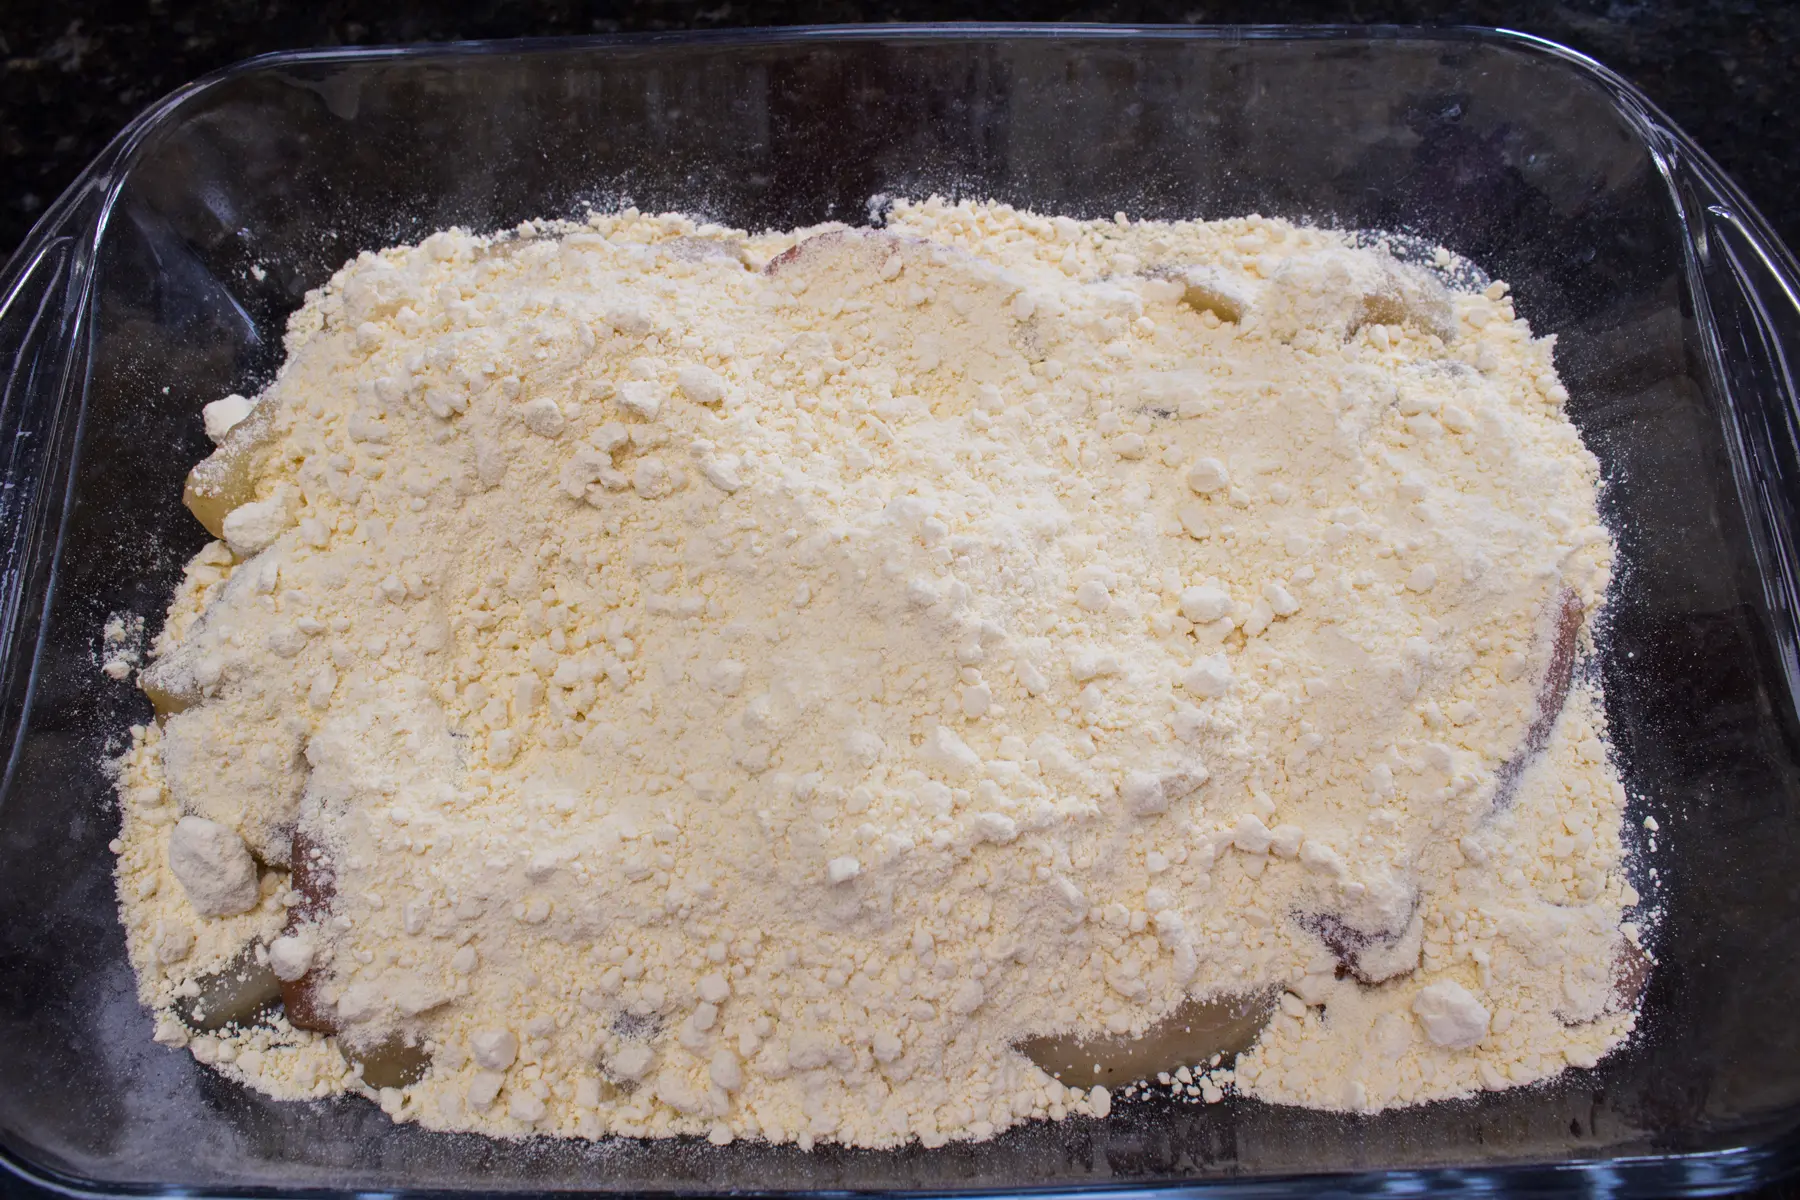 the second layer in this amazingly tasty apple dump cake is a box of cake mix, i prefer yellow cake mix